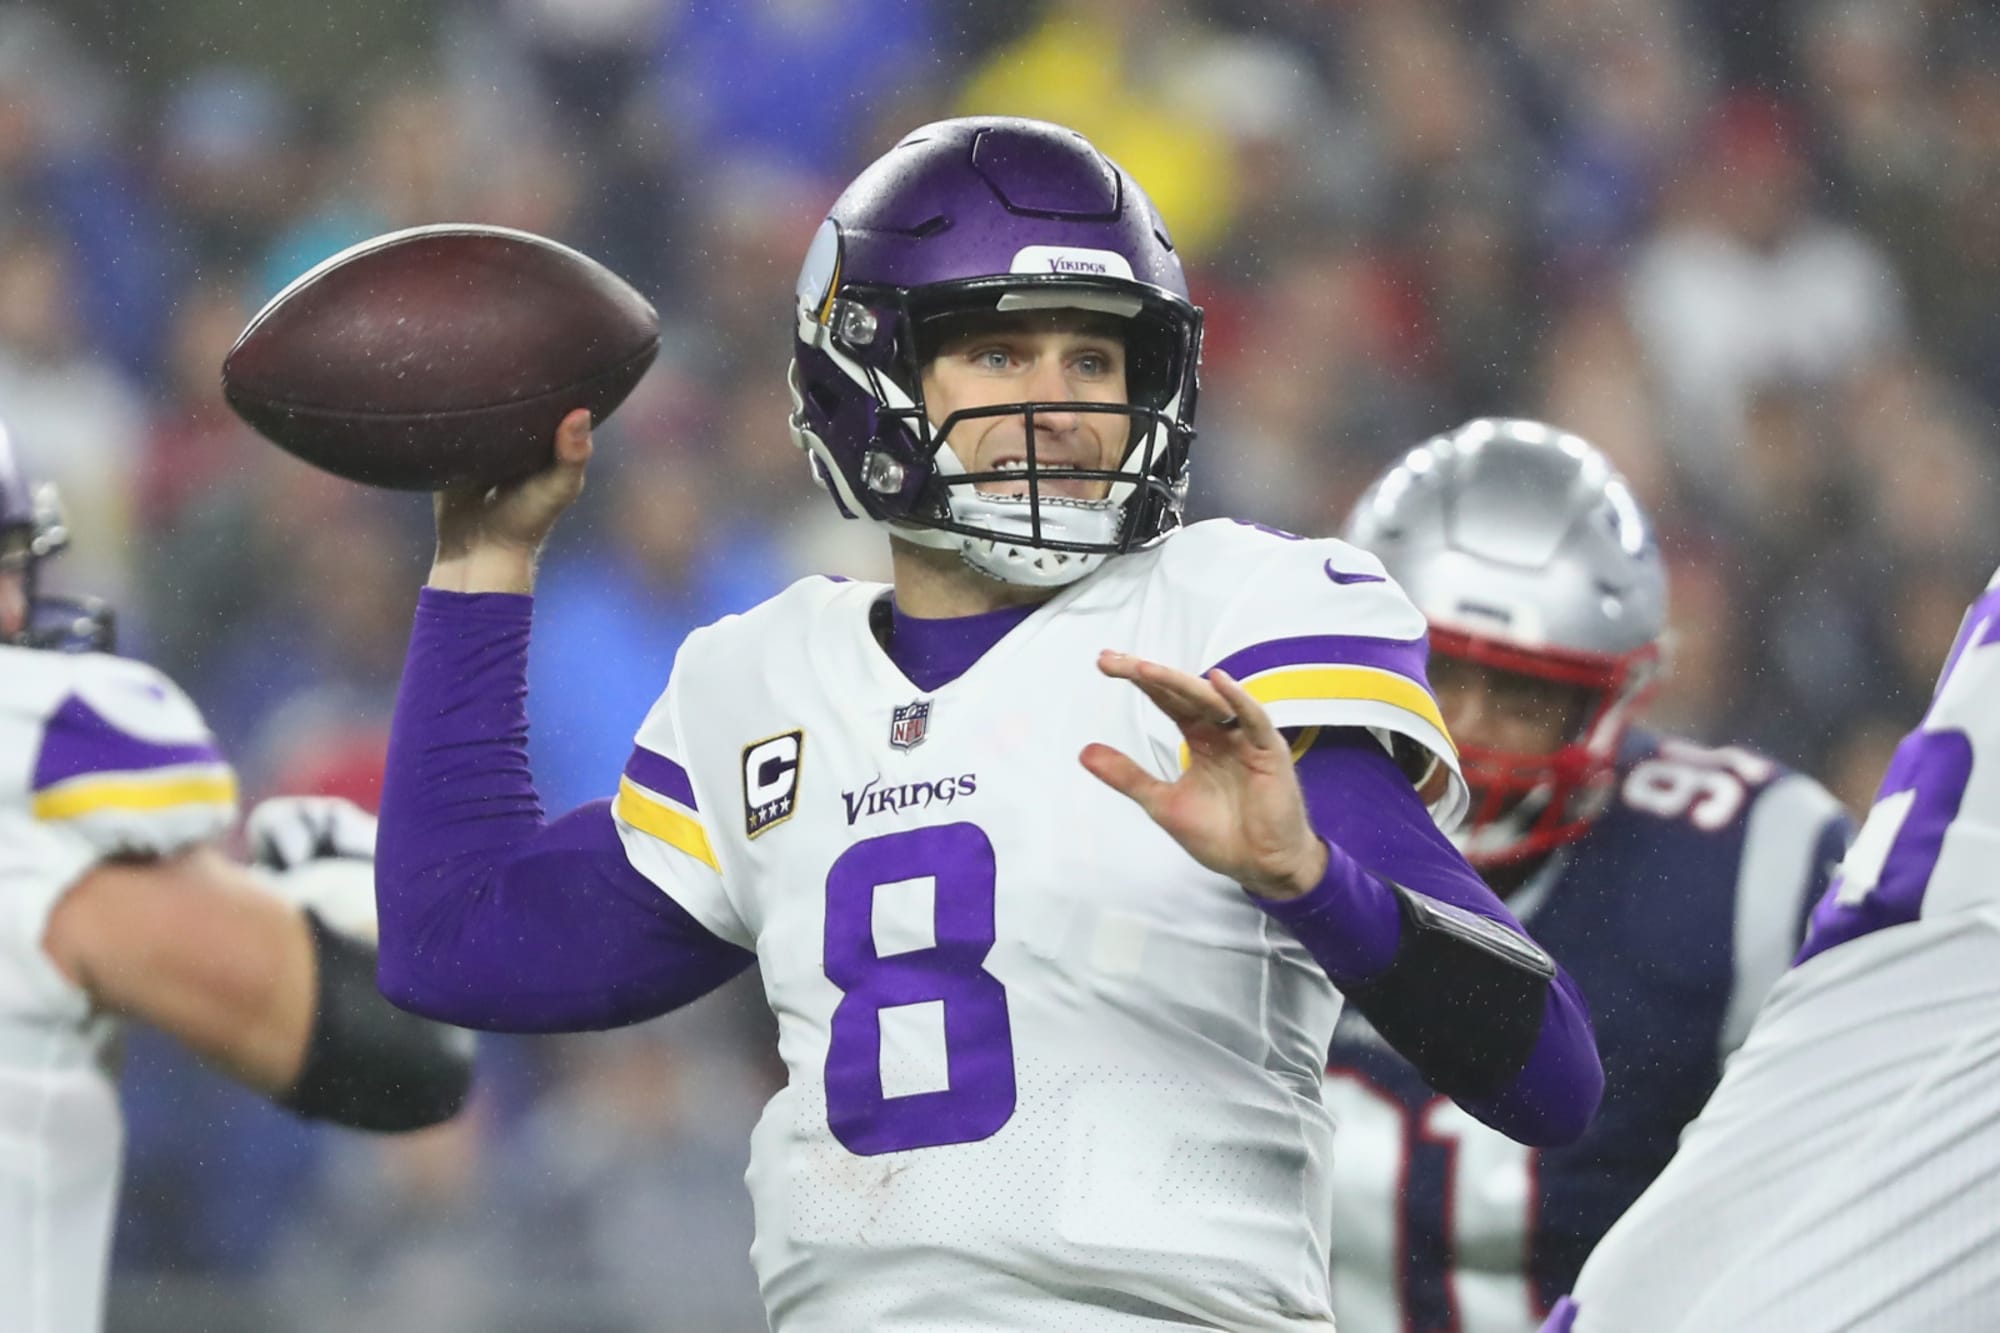 What are the Vikings’ playoff chances heading into Week 14?